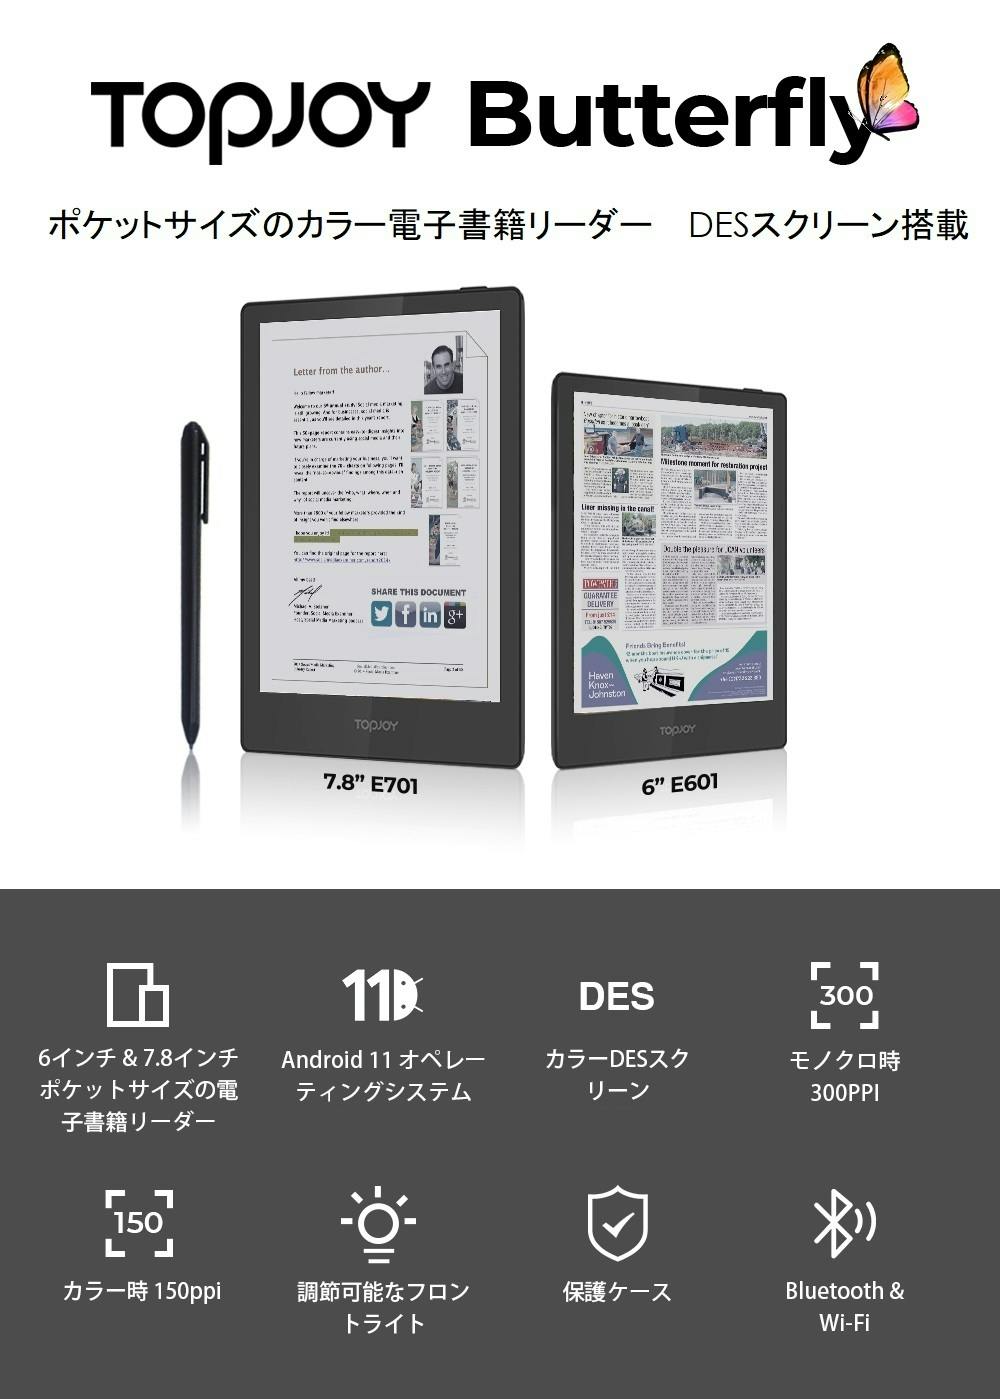 TopJoy Butterflyポケットサイズのカラー電子書籍リーダー日本初公開 CAMPFIRE (キャンプファイヤー)